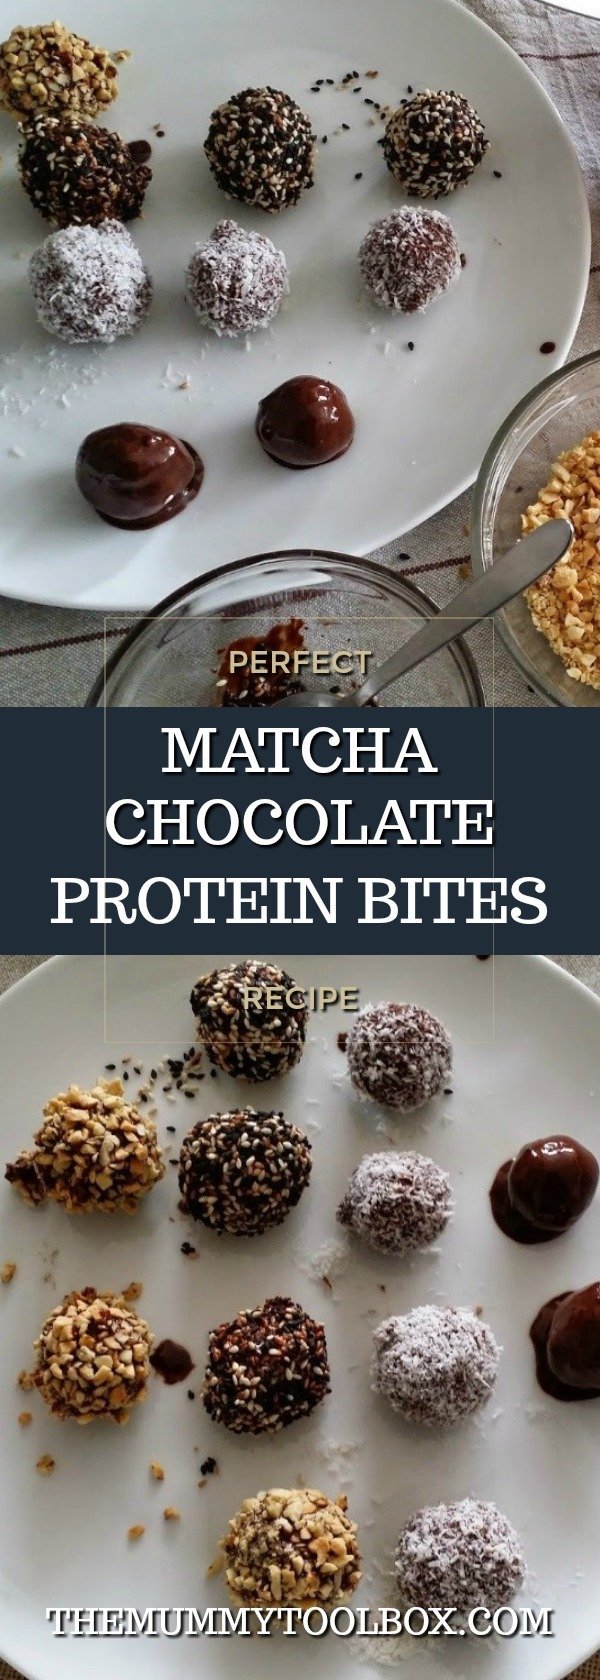 Matcha chocolate natural protein bites from scratch recipe guest post from Kitchen Takeovers. #recipes #delicious #foodies #protein